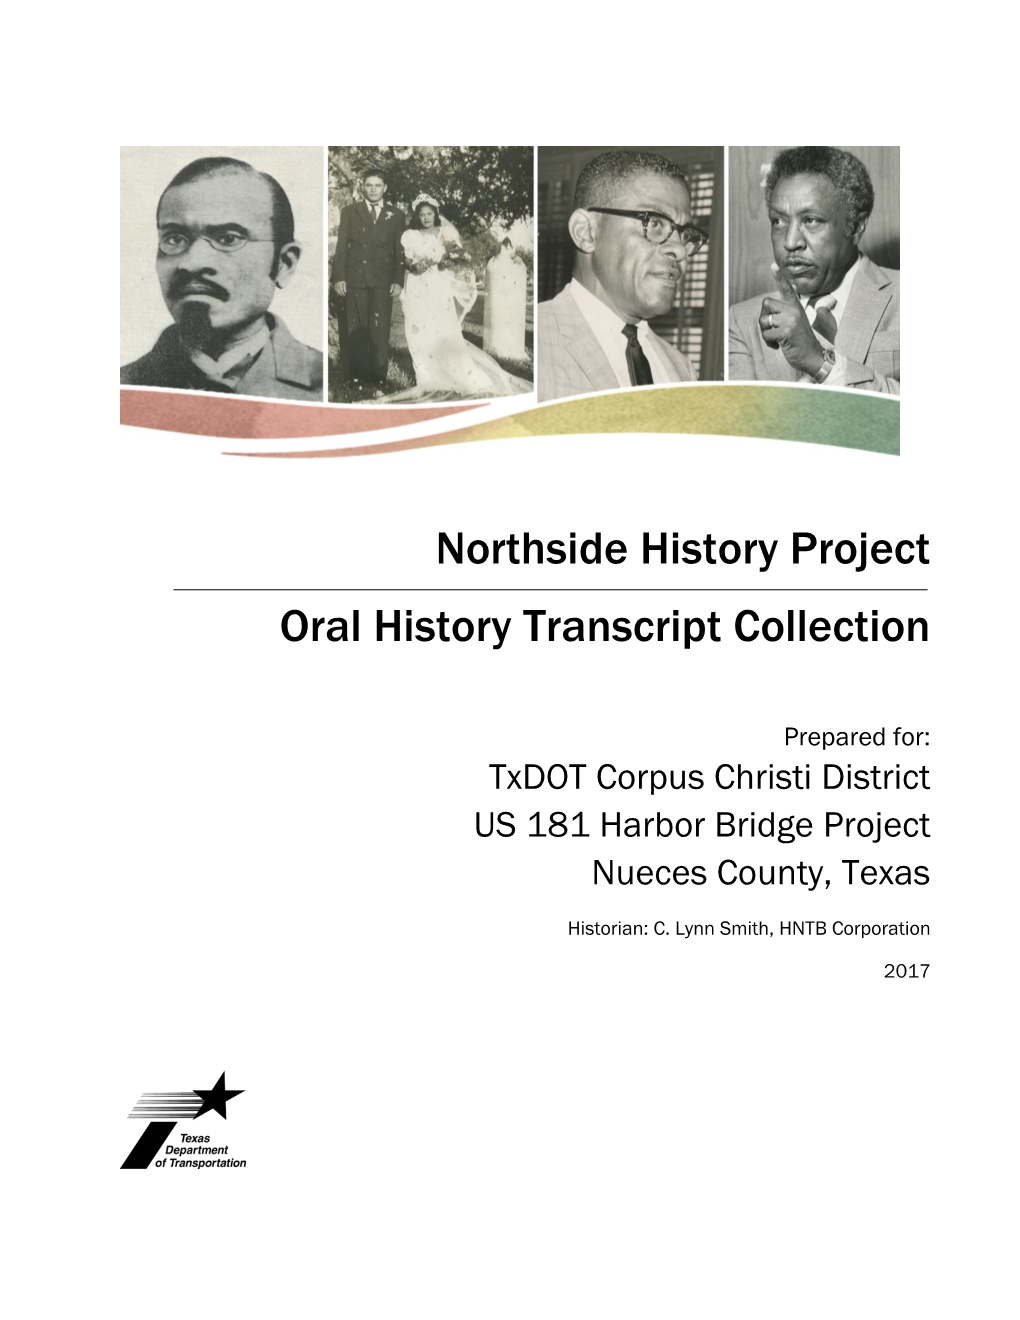 Northside History Project Oral History Transcript Collection